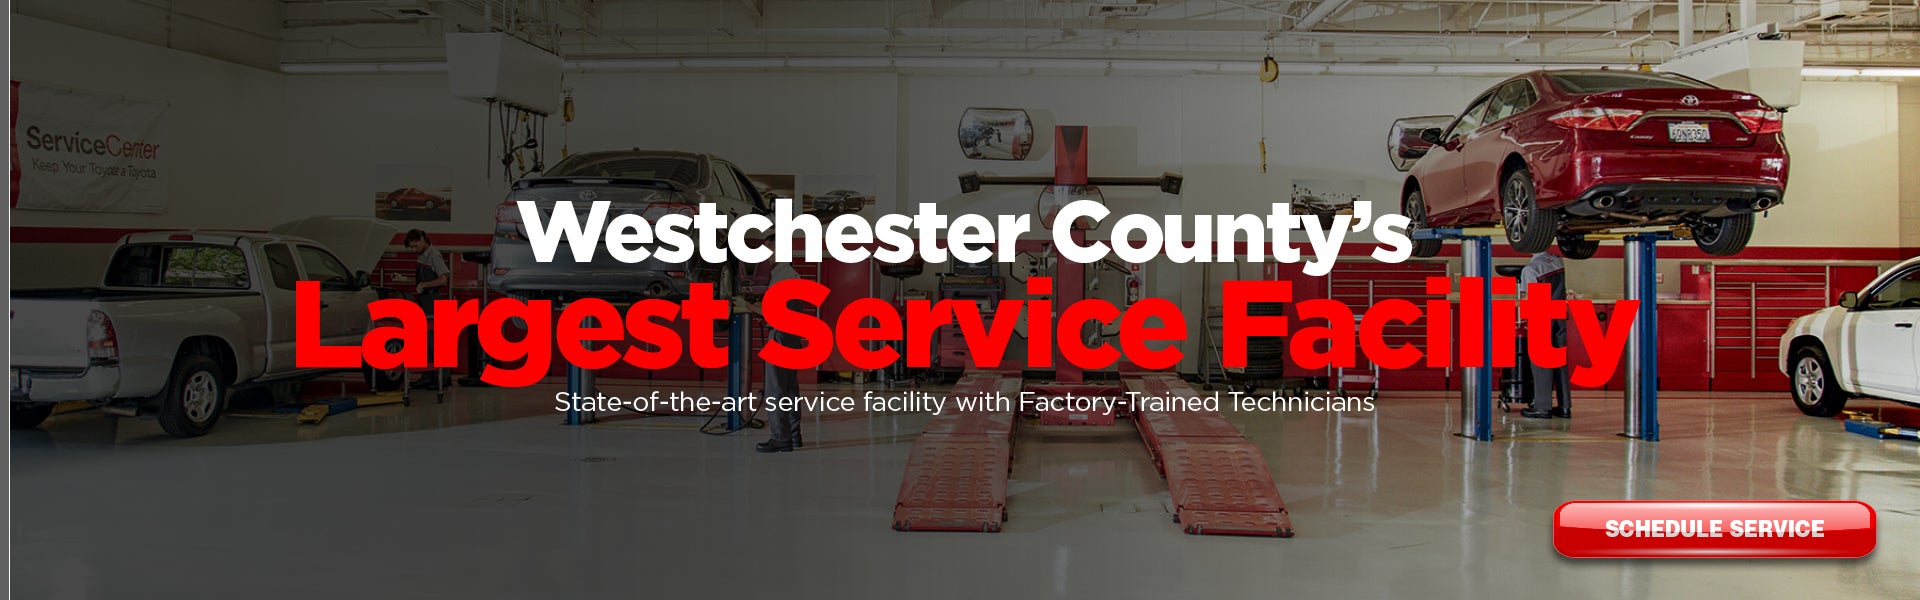 Westchester County's Largest Toyota Service Facility